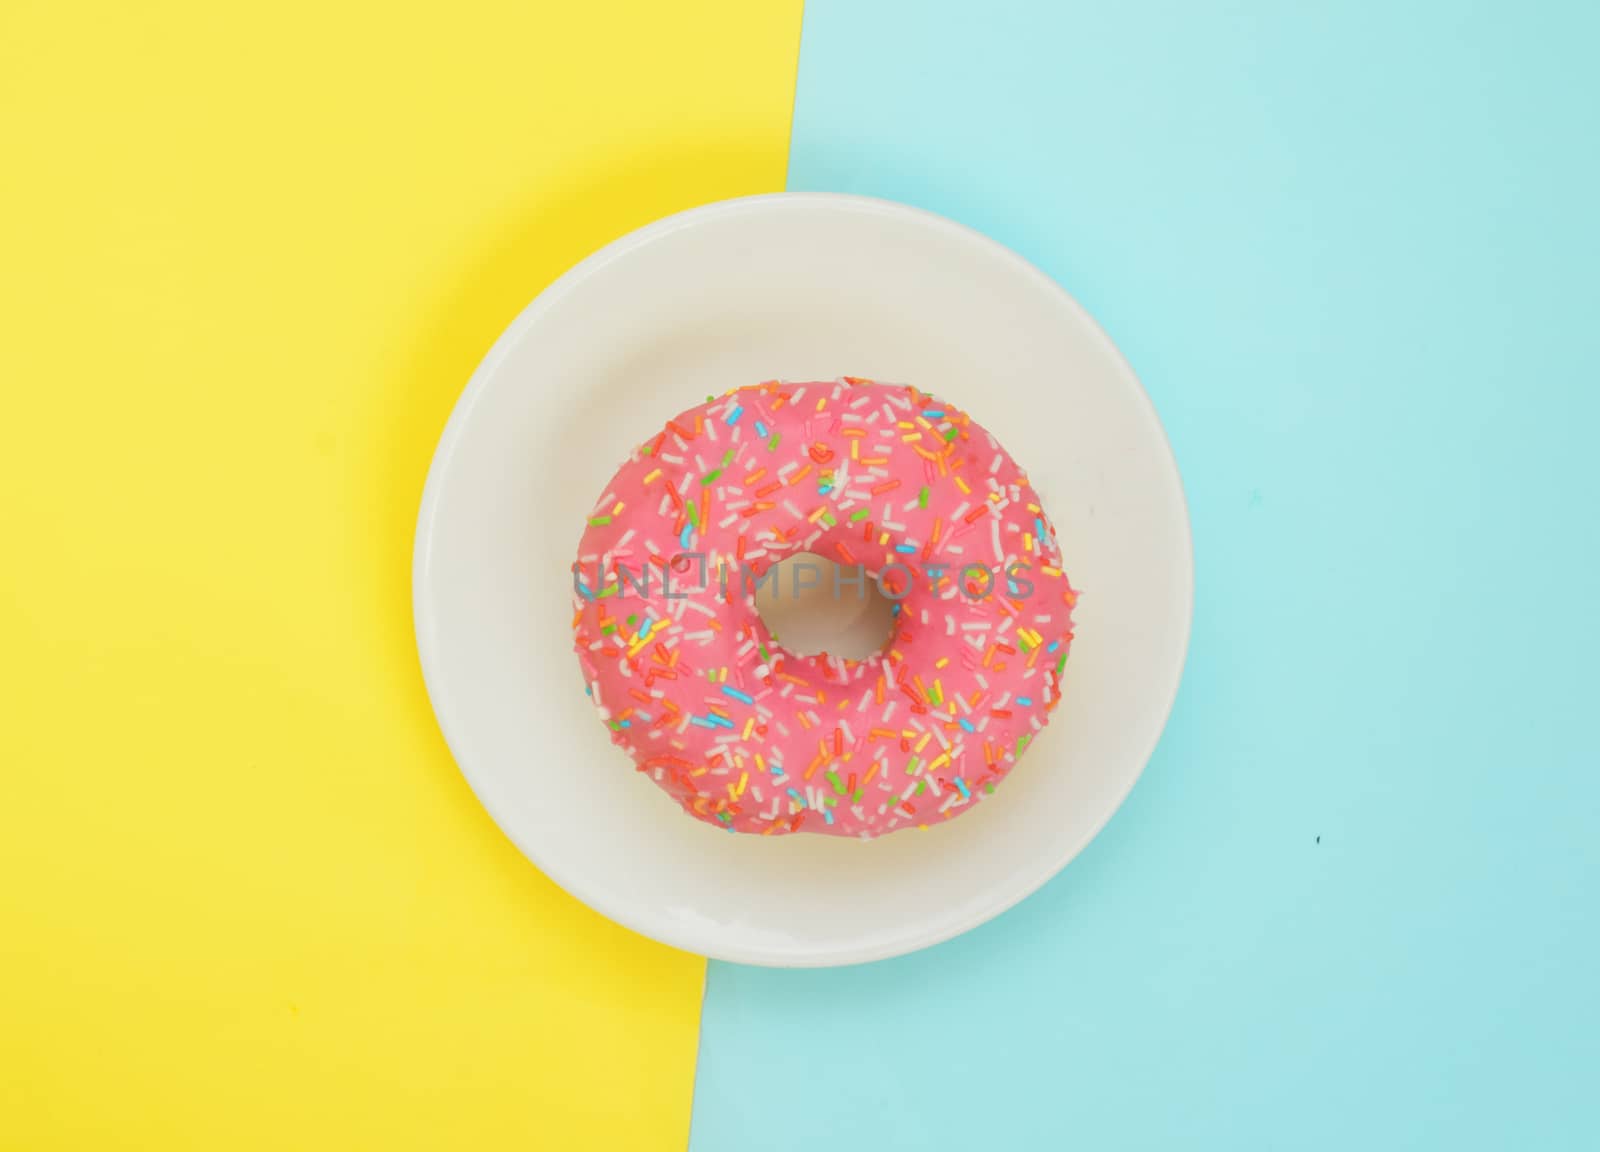 Top view,One pink glazed donut on white plate on pastel yellow turquoise background by andre_dechapelle